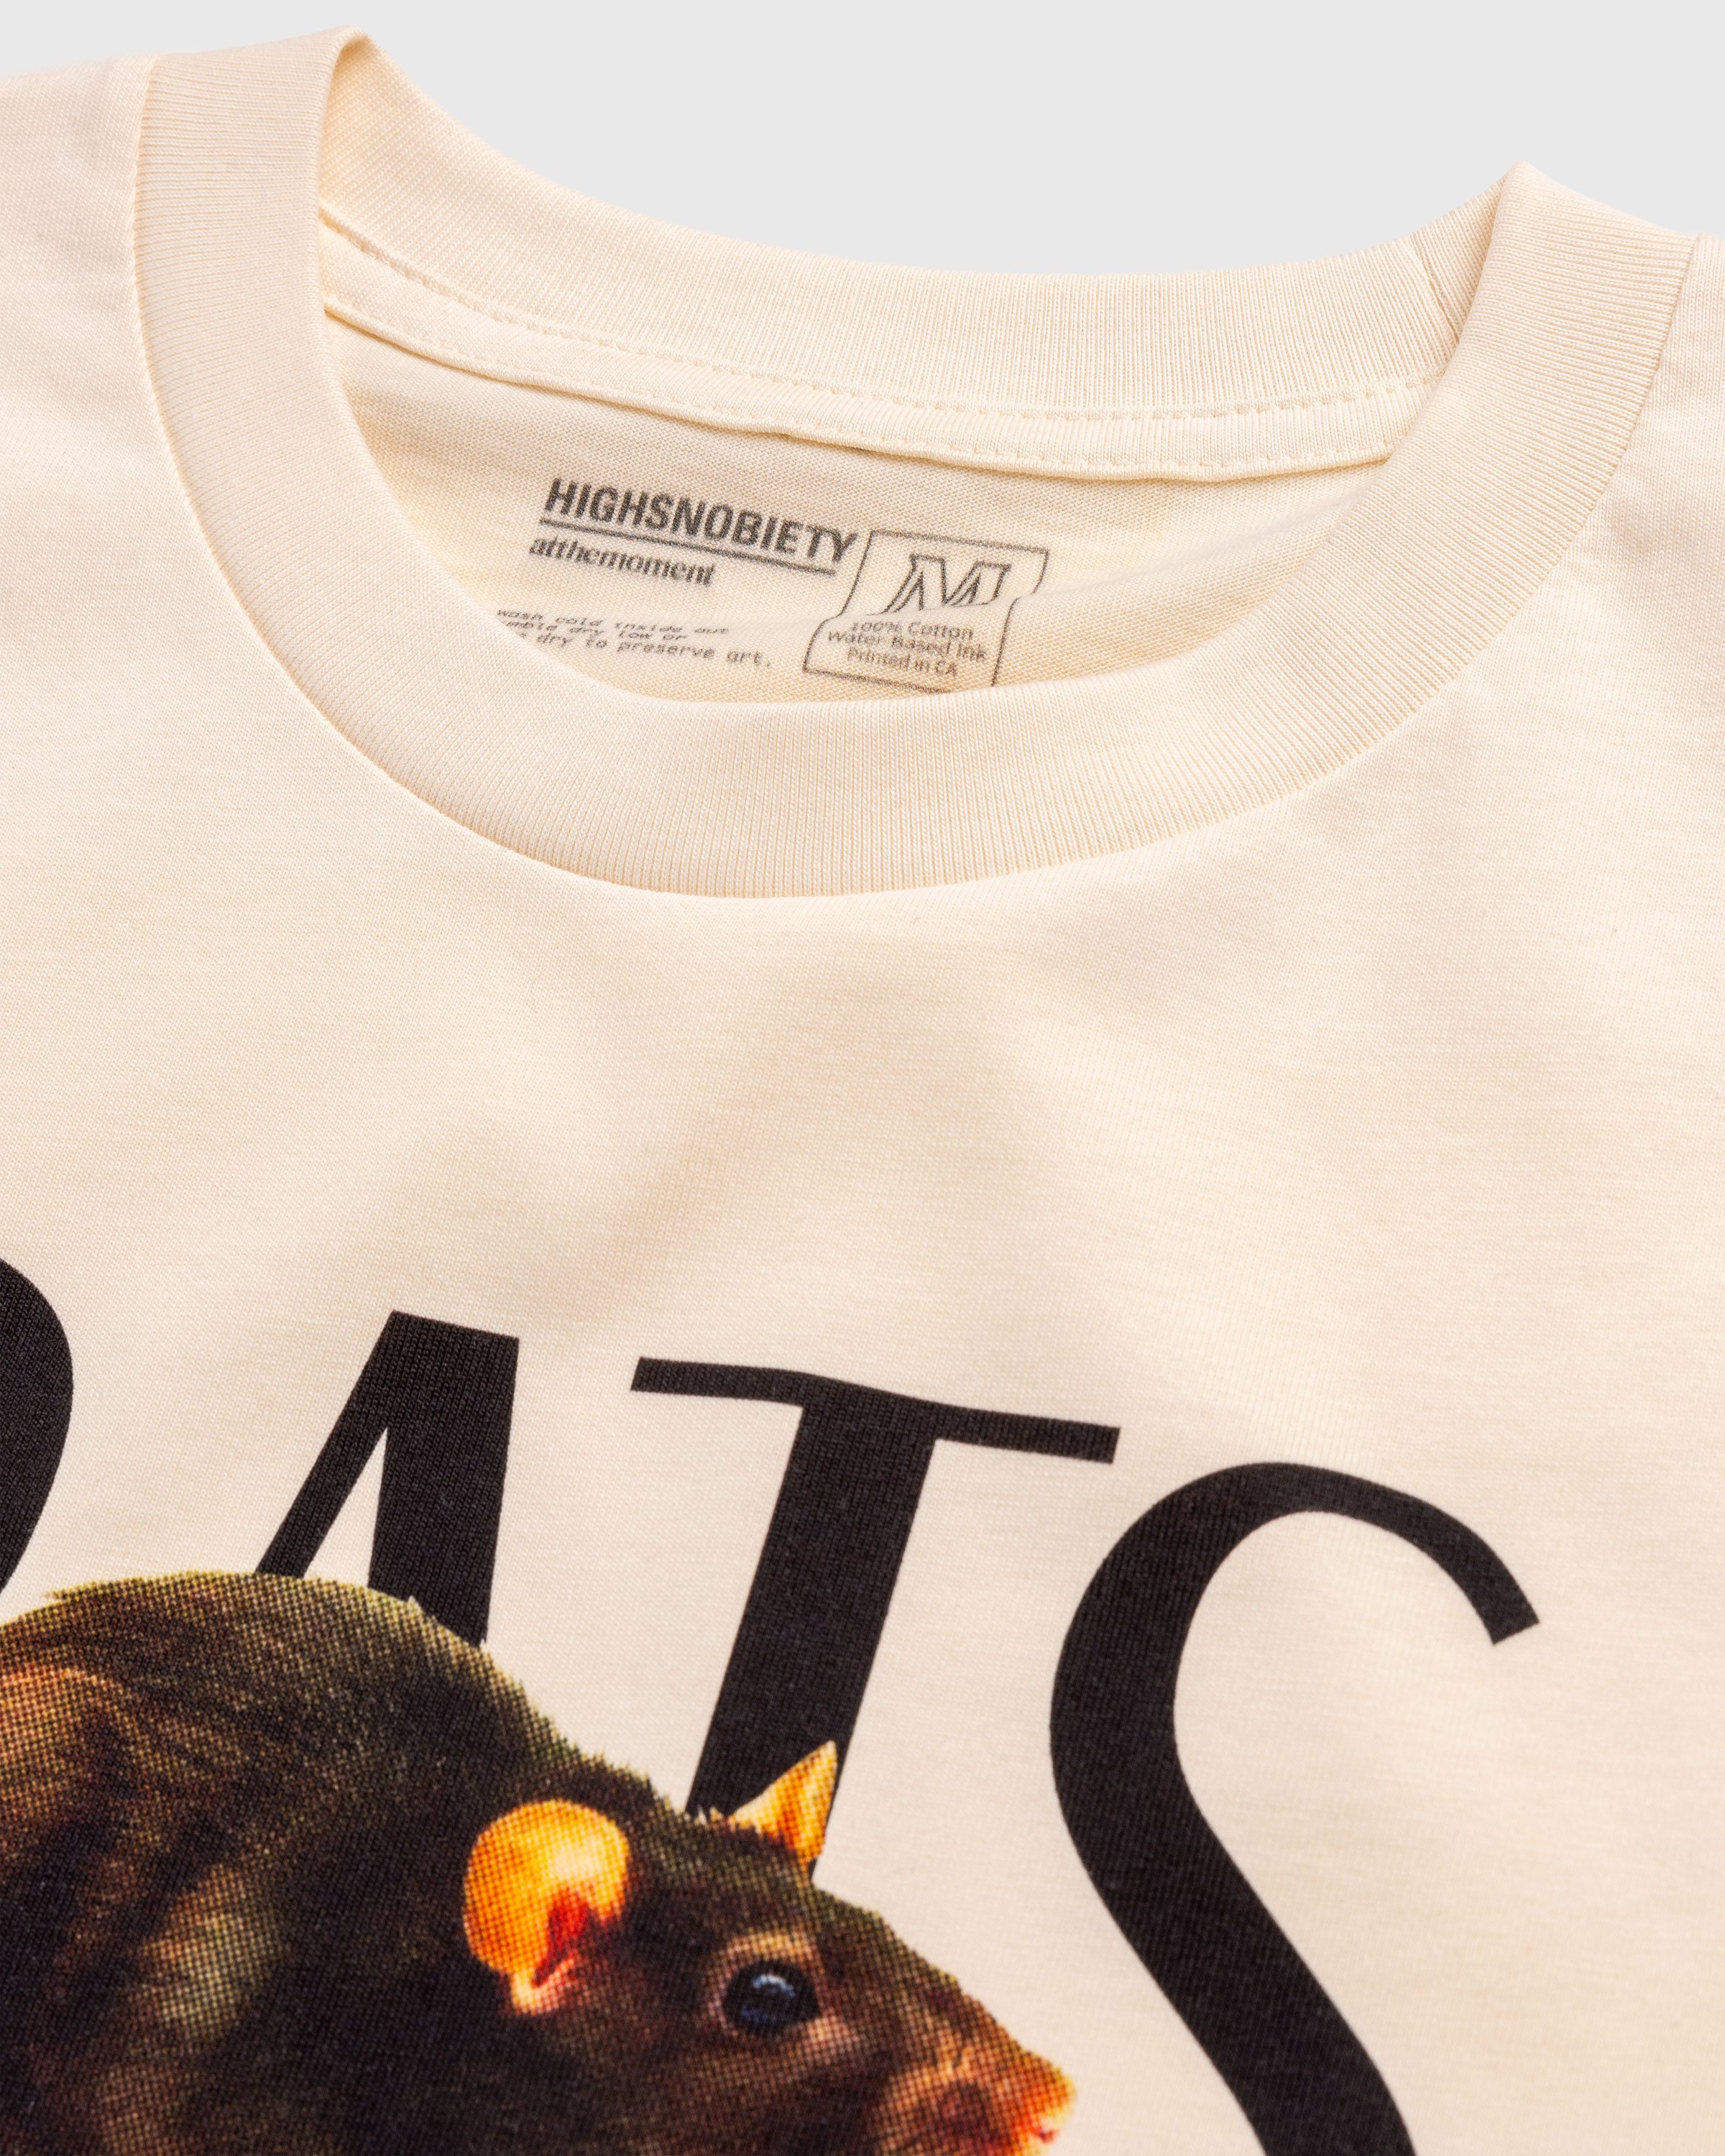 At The Moment x Highsnobiety - New York Rats T-Shirt - Clothing - Beige - Image 6